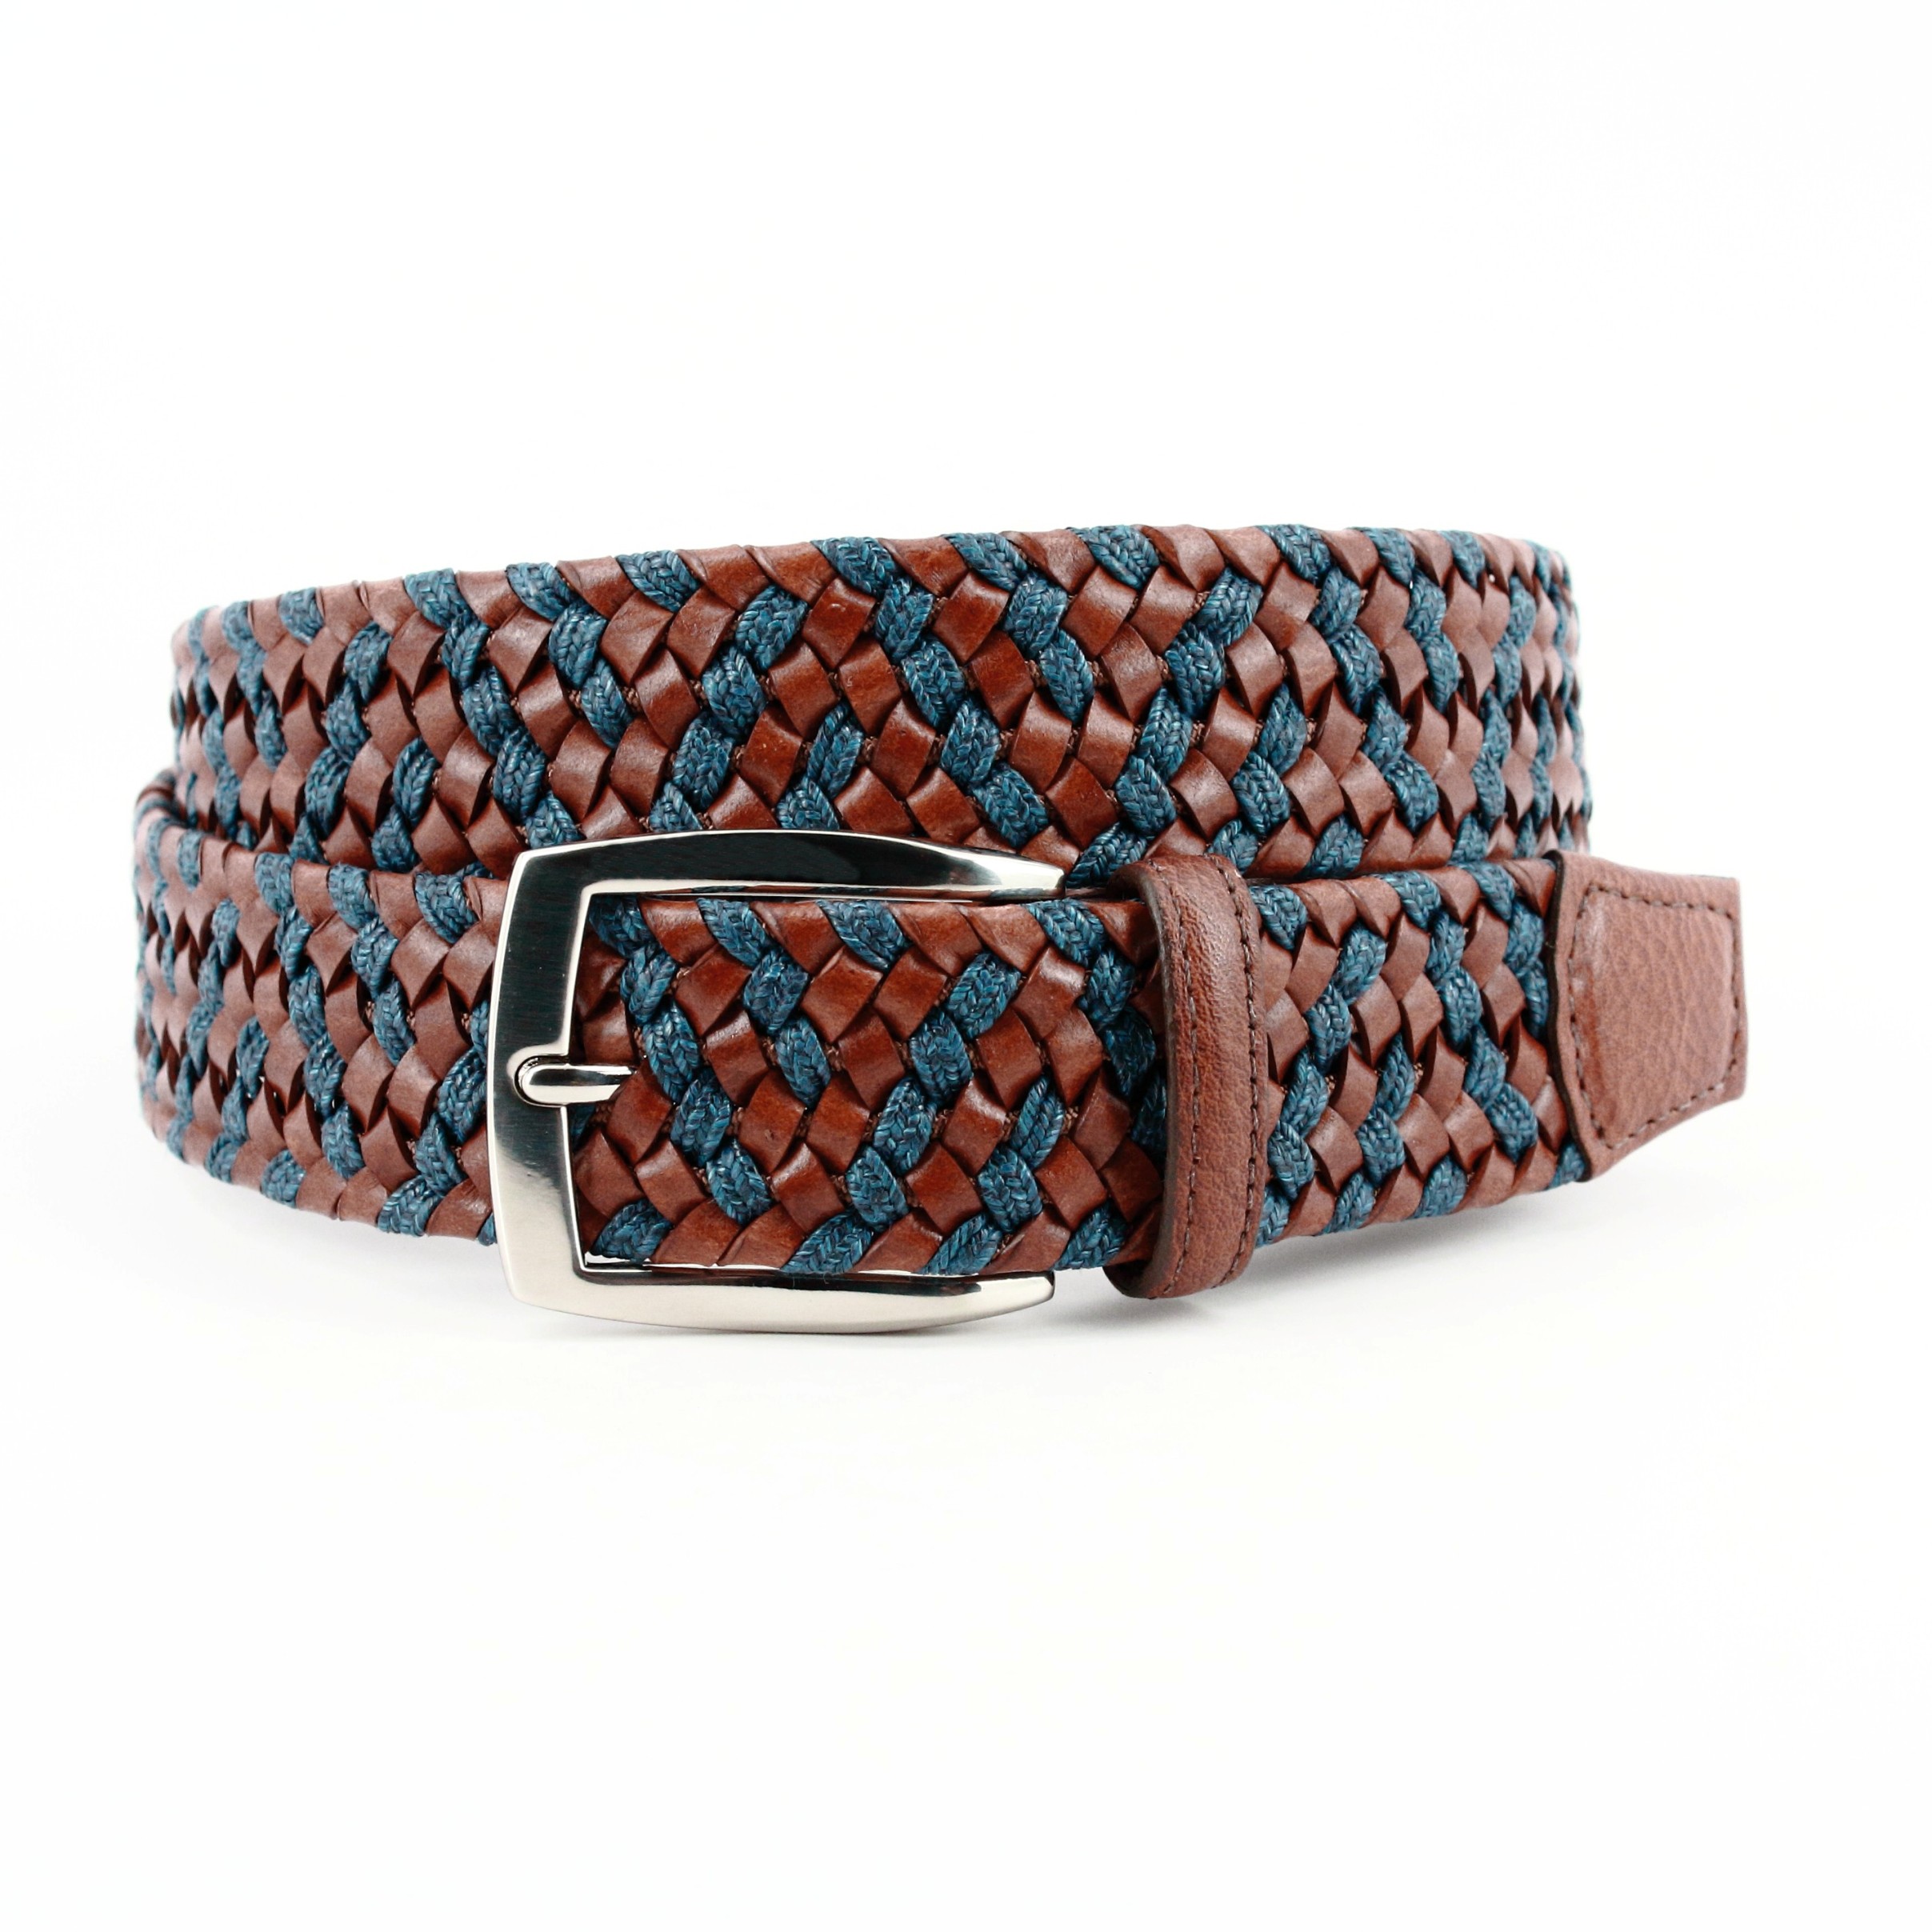 Italian Braided Leather & Linen Belt in Cognac/Navy by Torino Leather Co. -  Hansen's Clothing